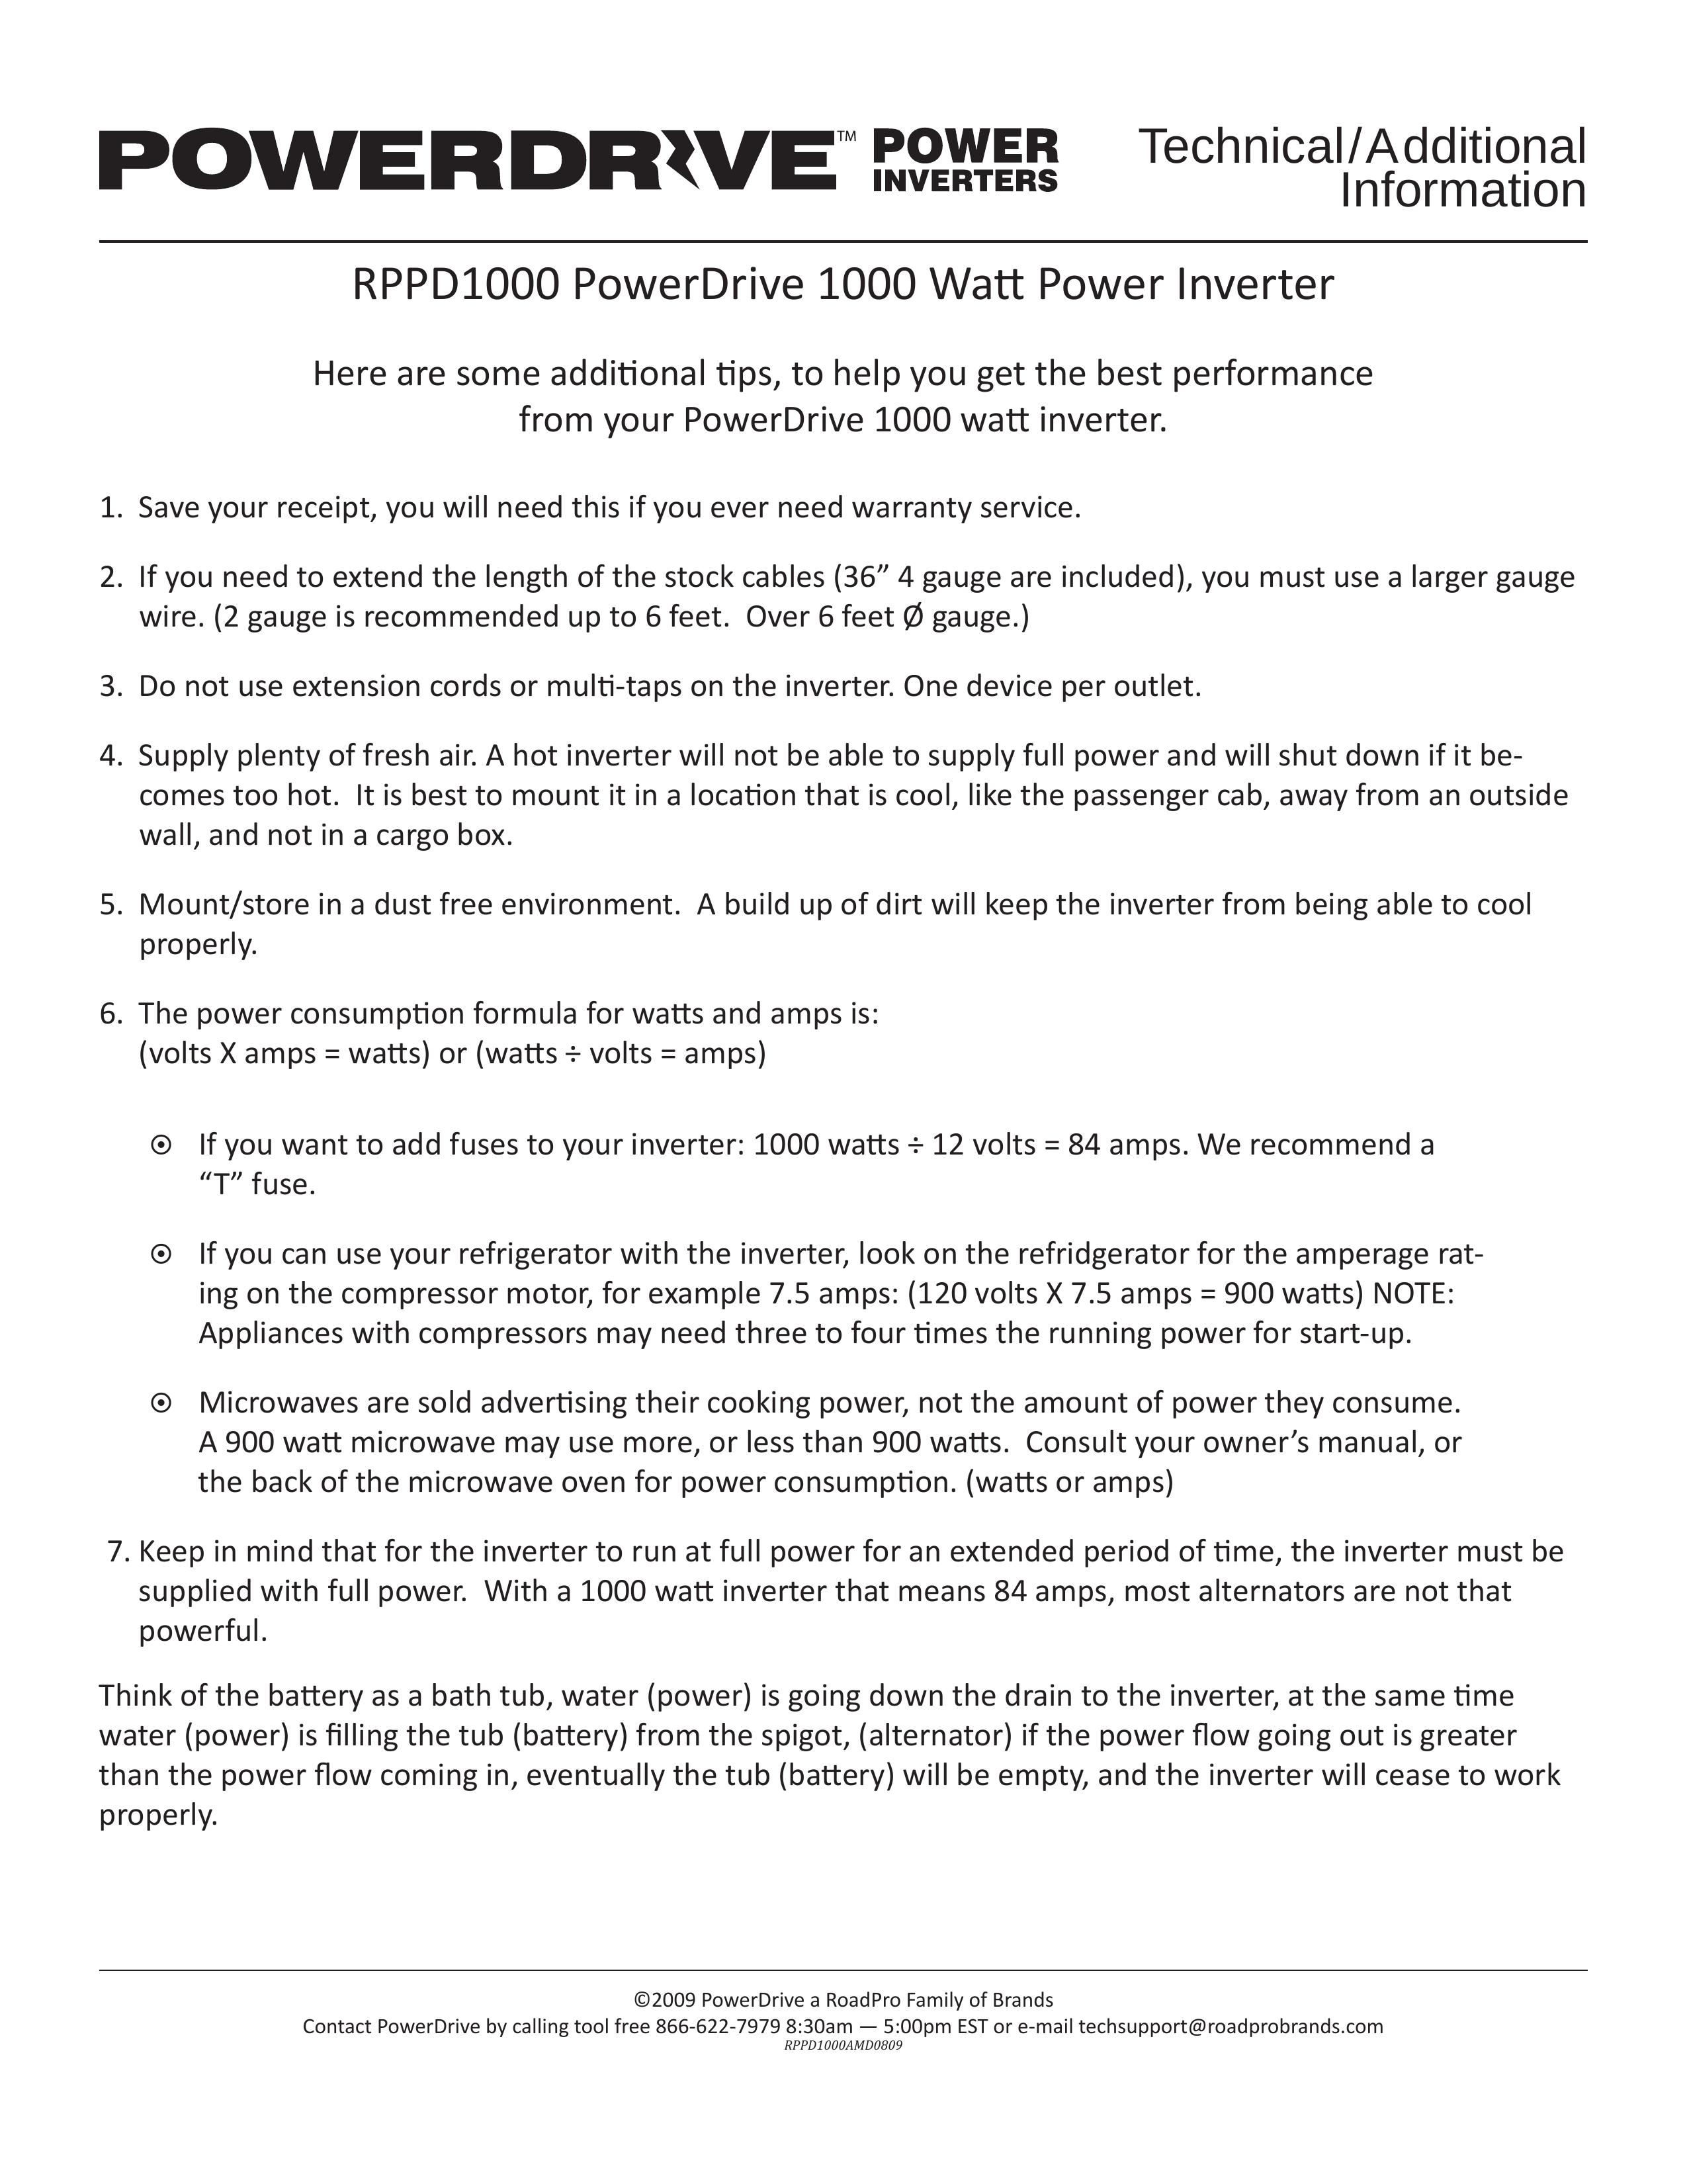 Power Drive RPPD1000 Marine Battery User Manual